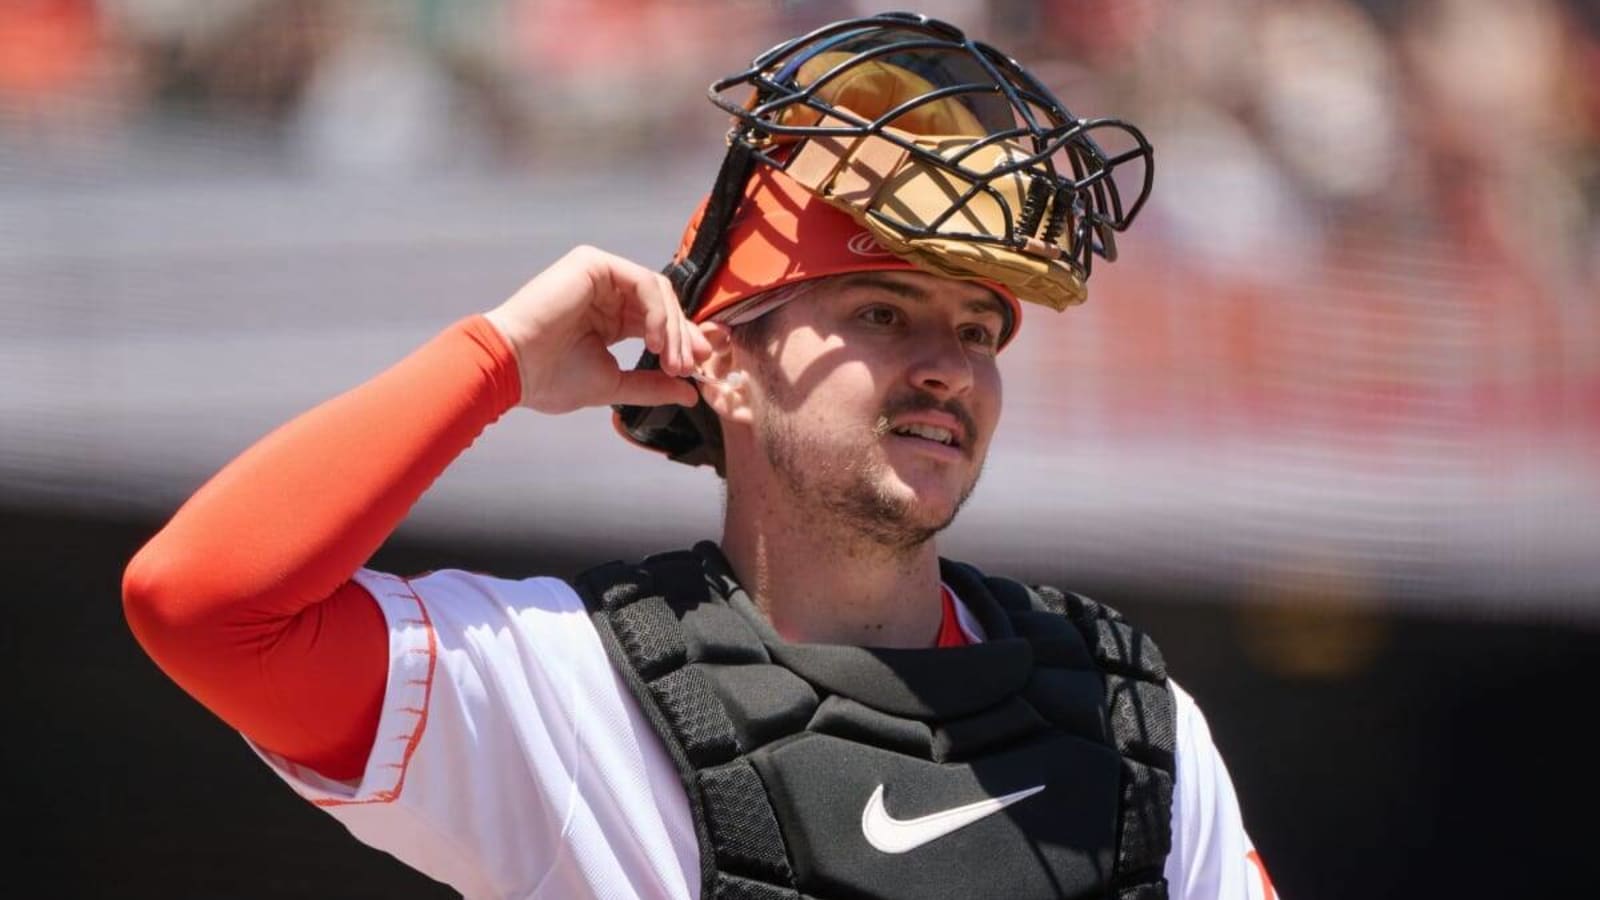  Giants C Patrick Bailey loses Gold Glove to division rival